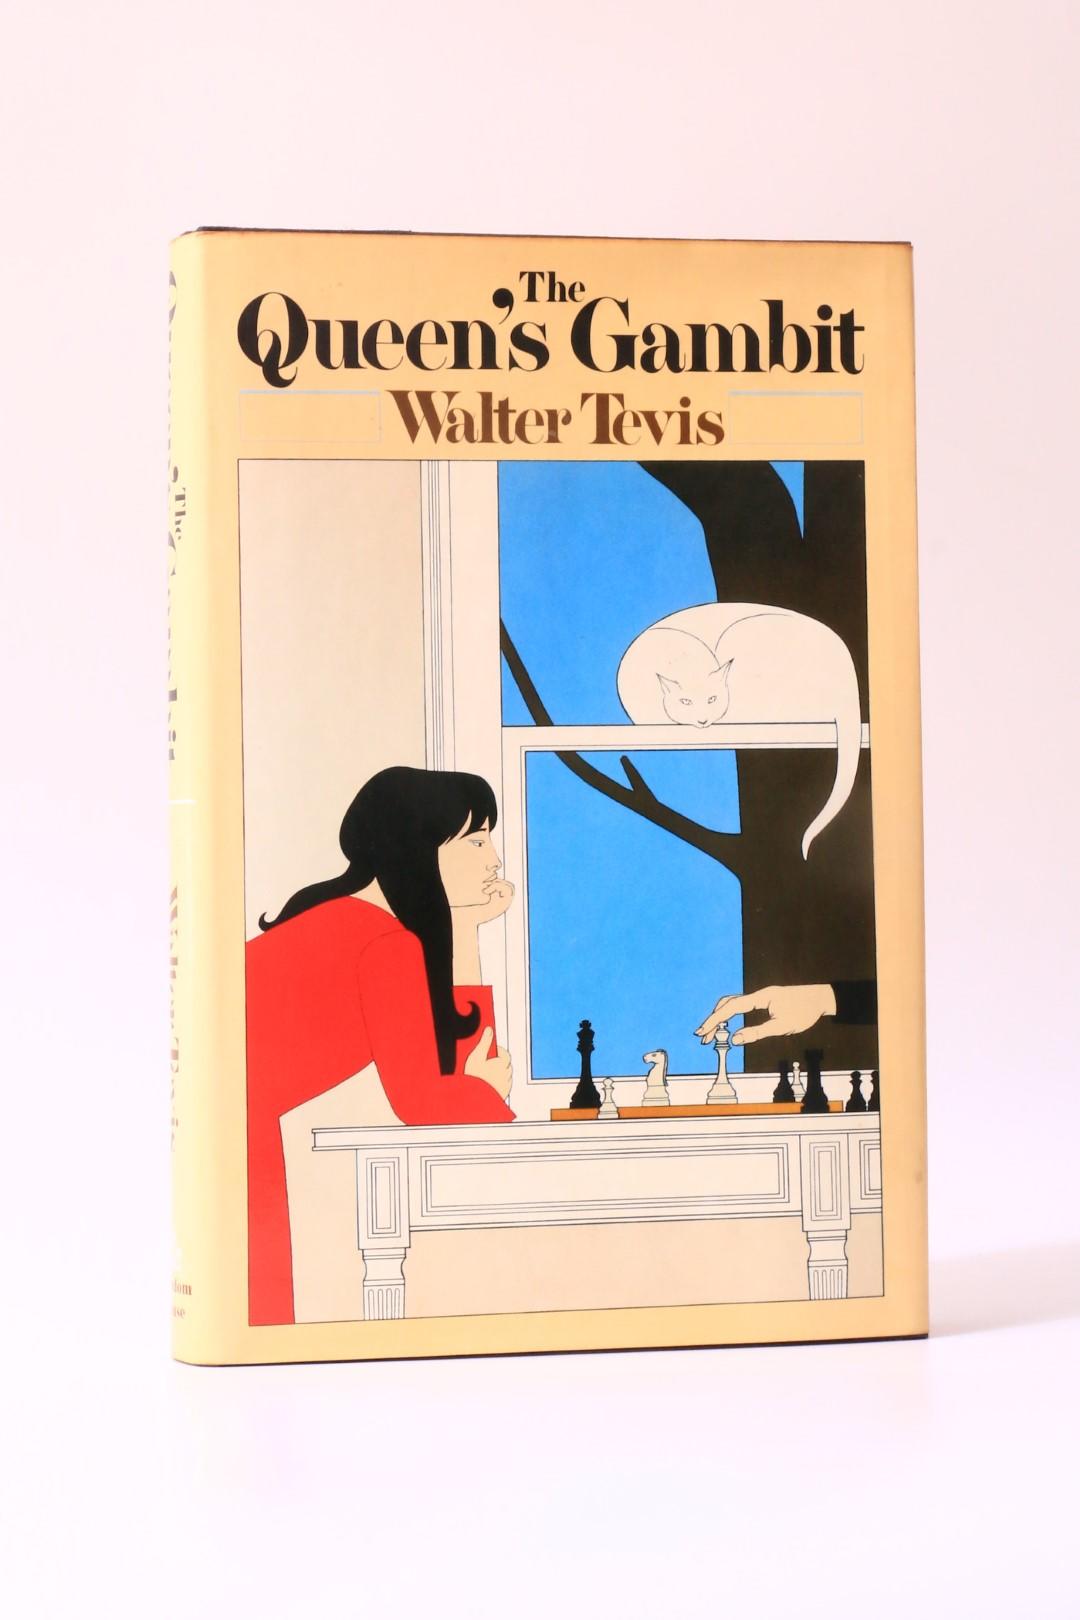 Walter Tevis - The Queen's Gambit - Random House, 1983, First Edition.